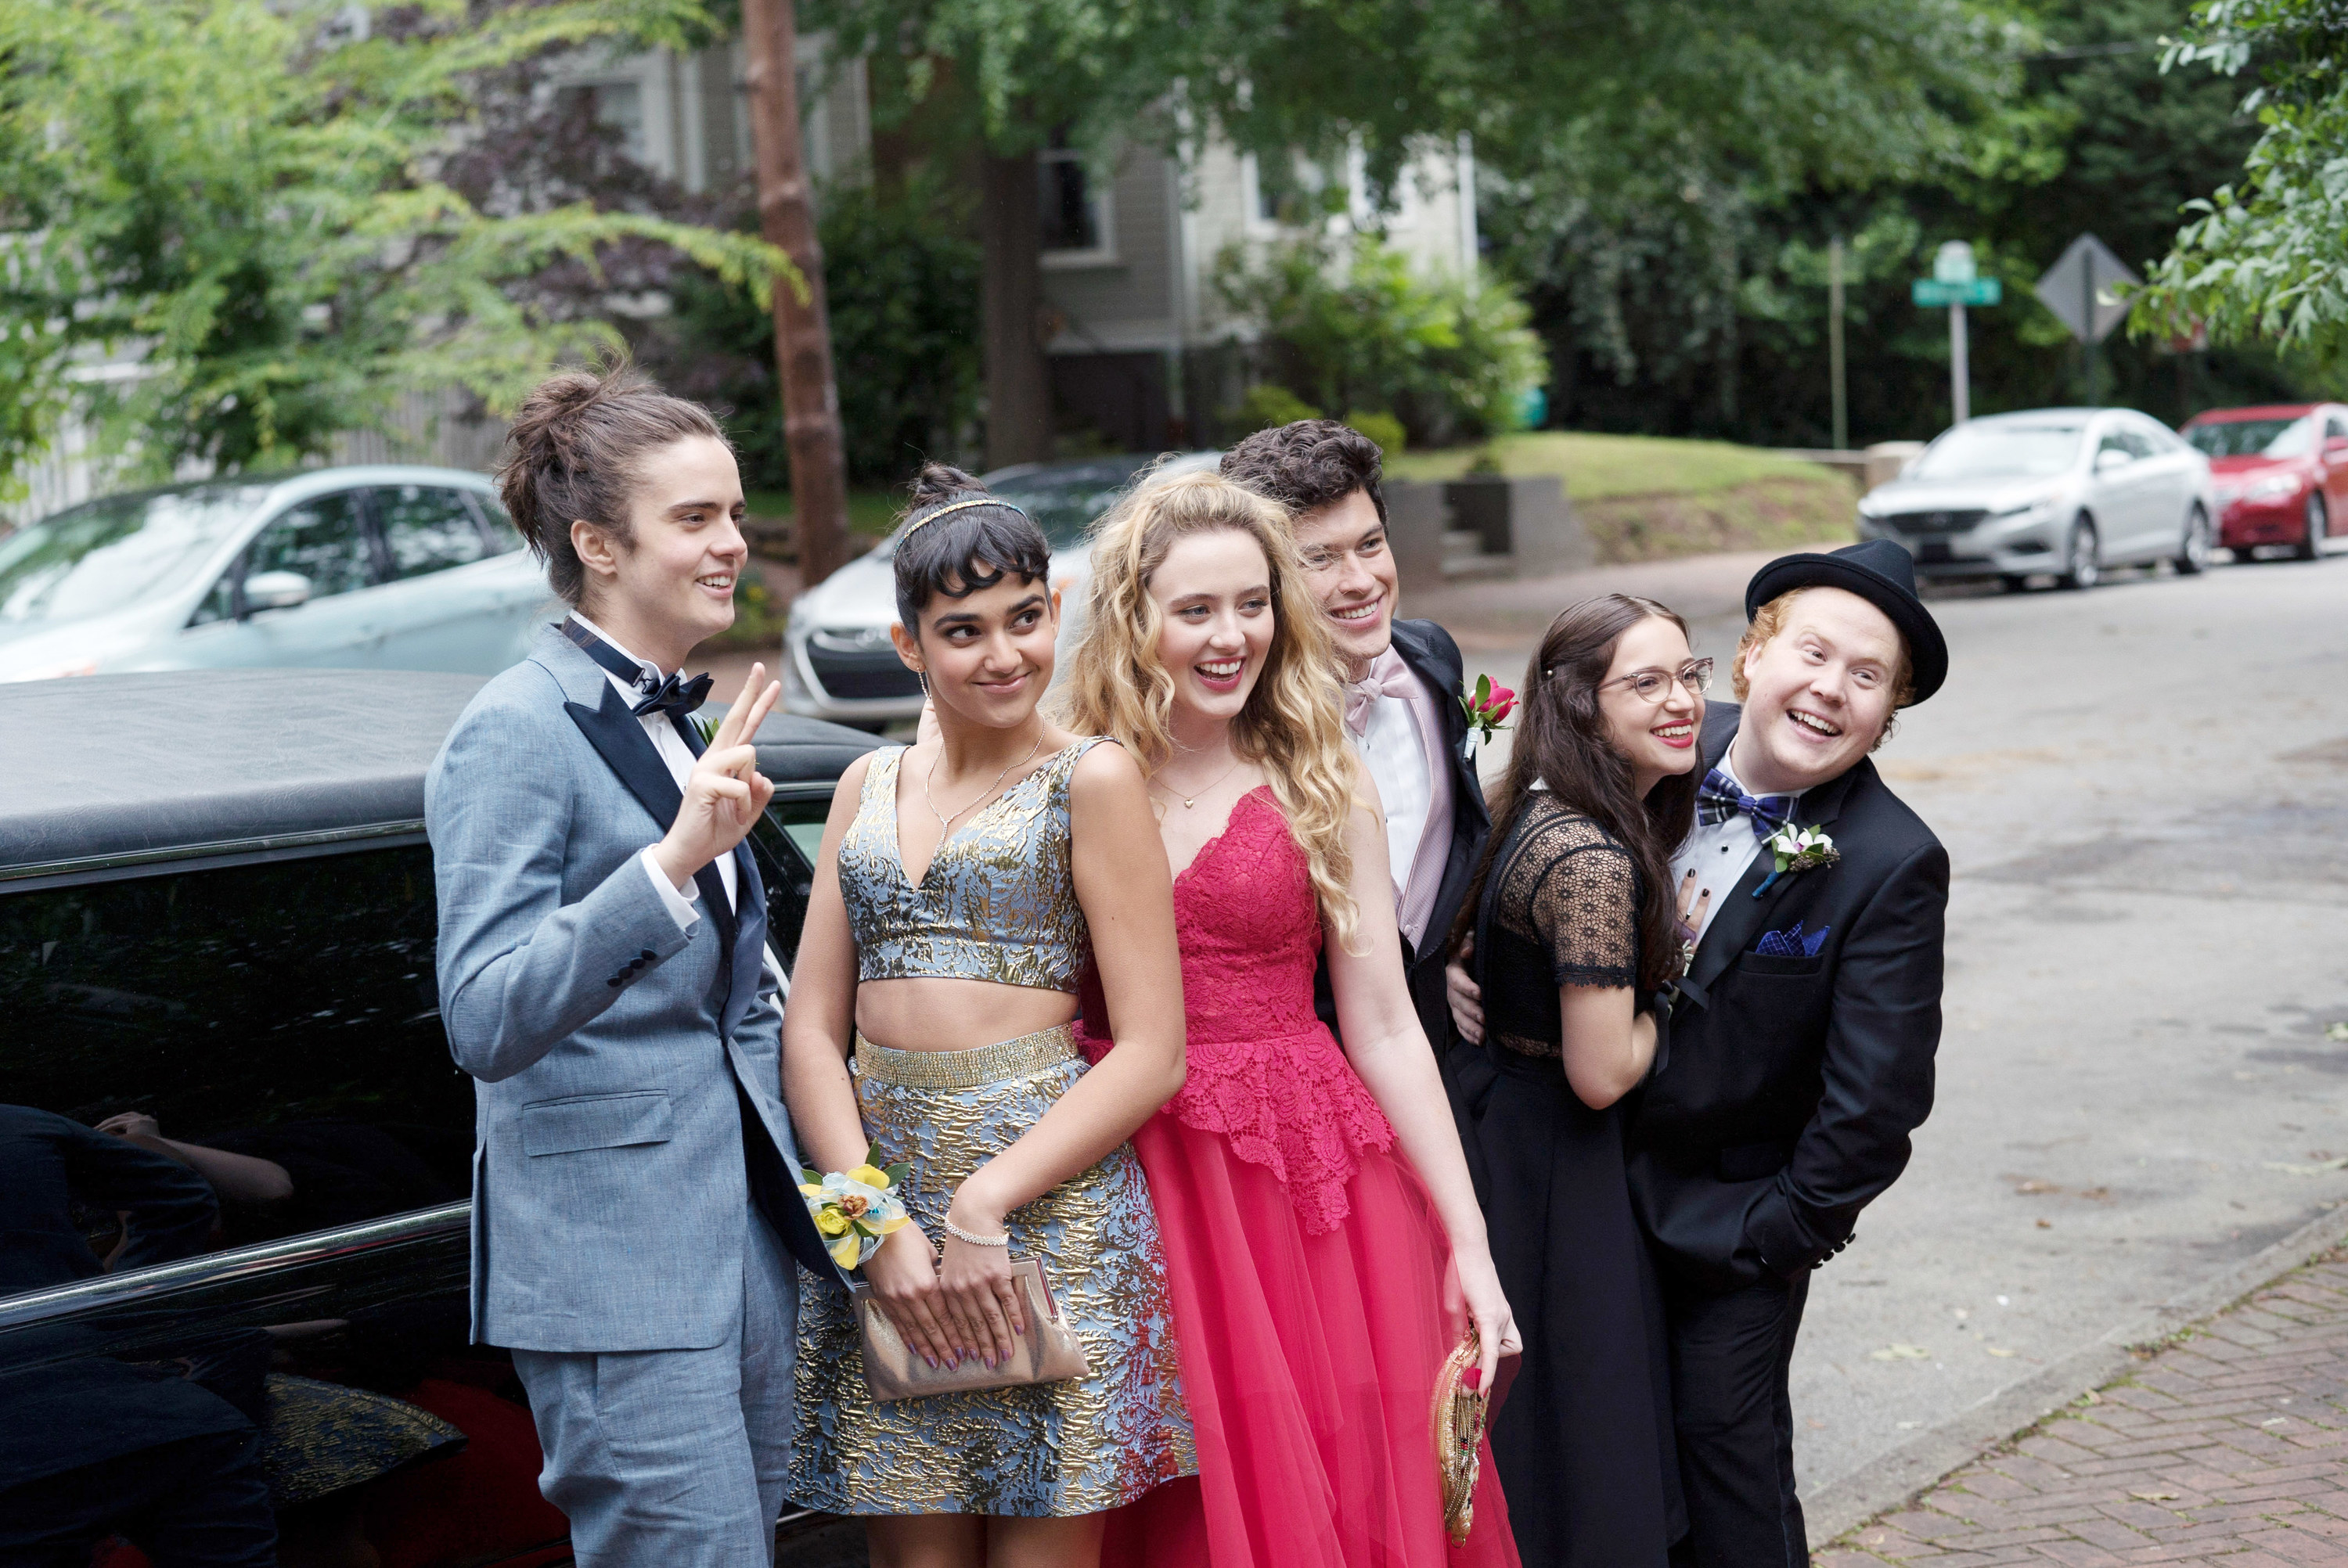 the teens posing in front of their prom limo